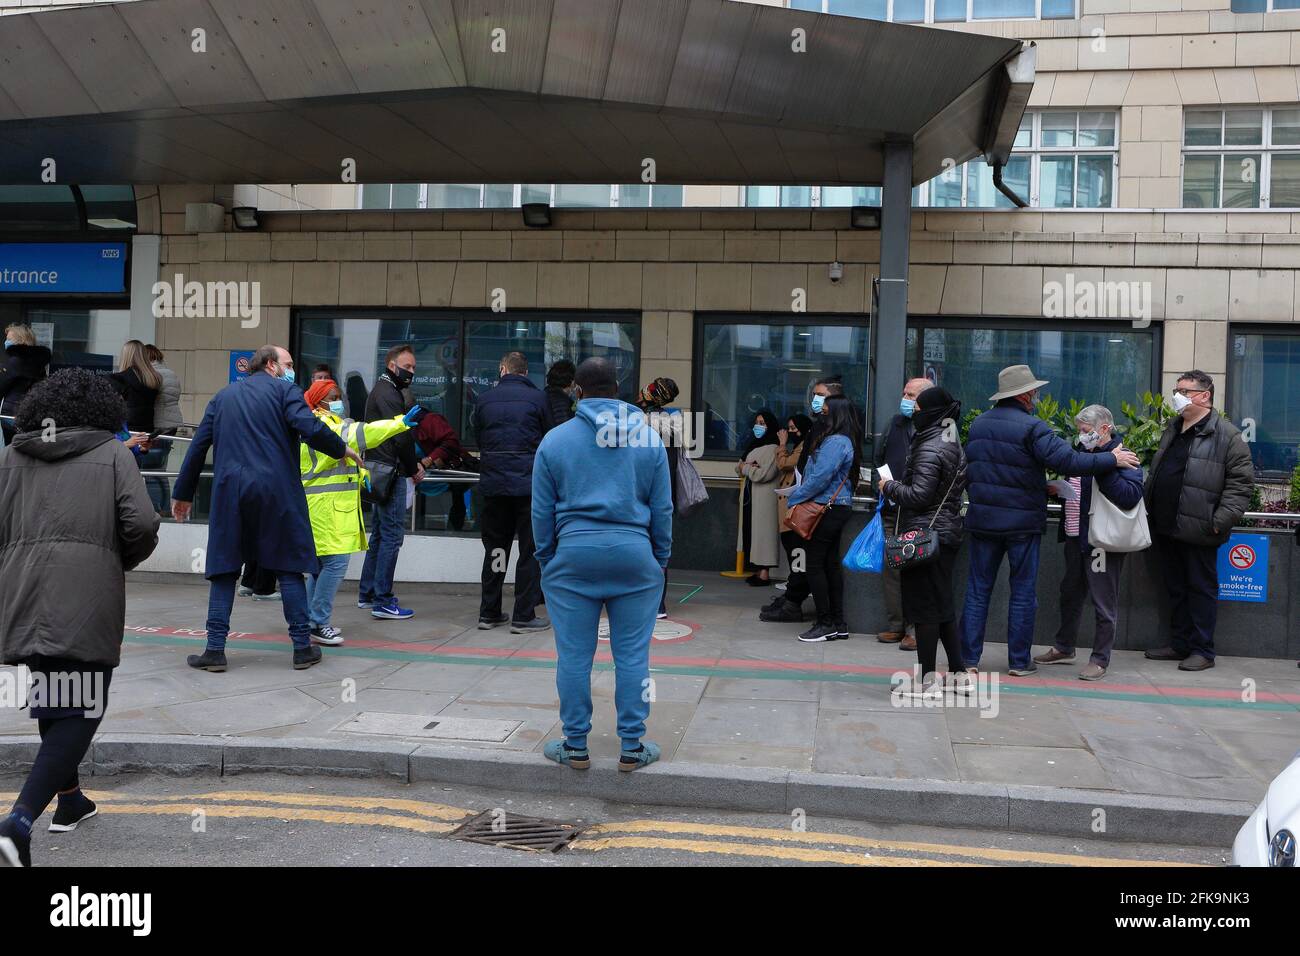 Moorfielsa Eye Hospital - London (UK), 29 April 2021: Long queues are seen outside Moorfields eye hospital after a reported computer failure.Patients Stock Photo